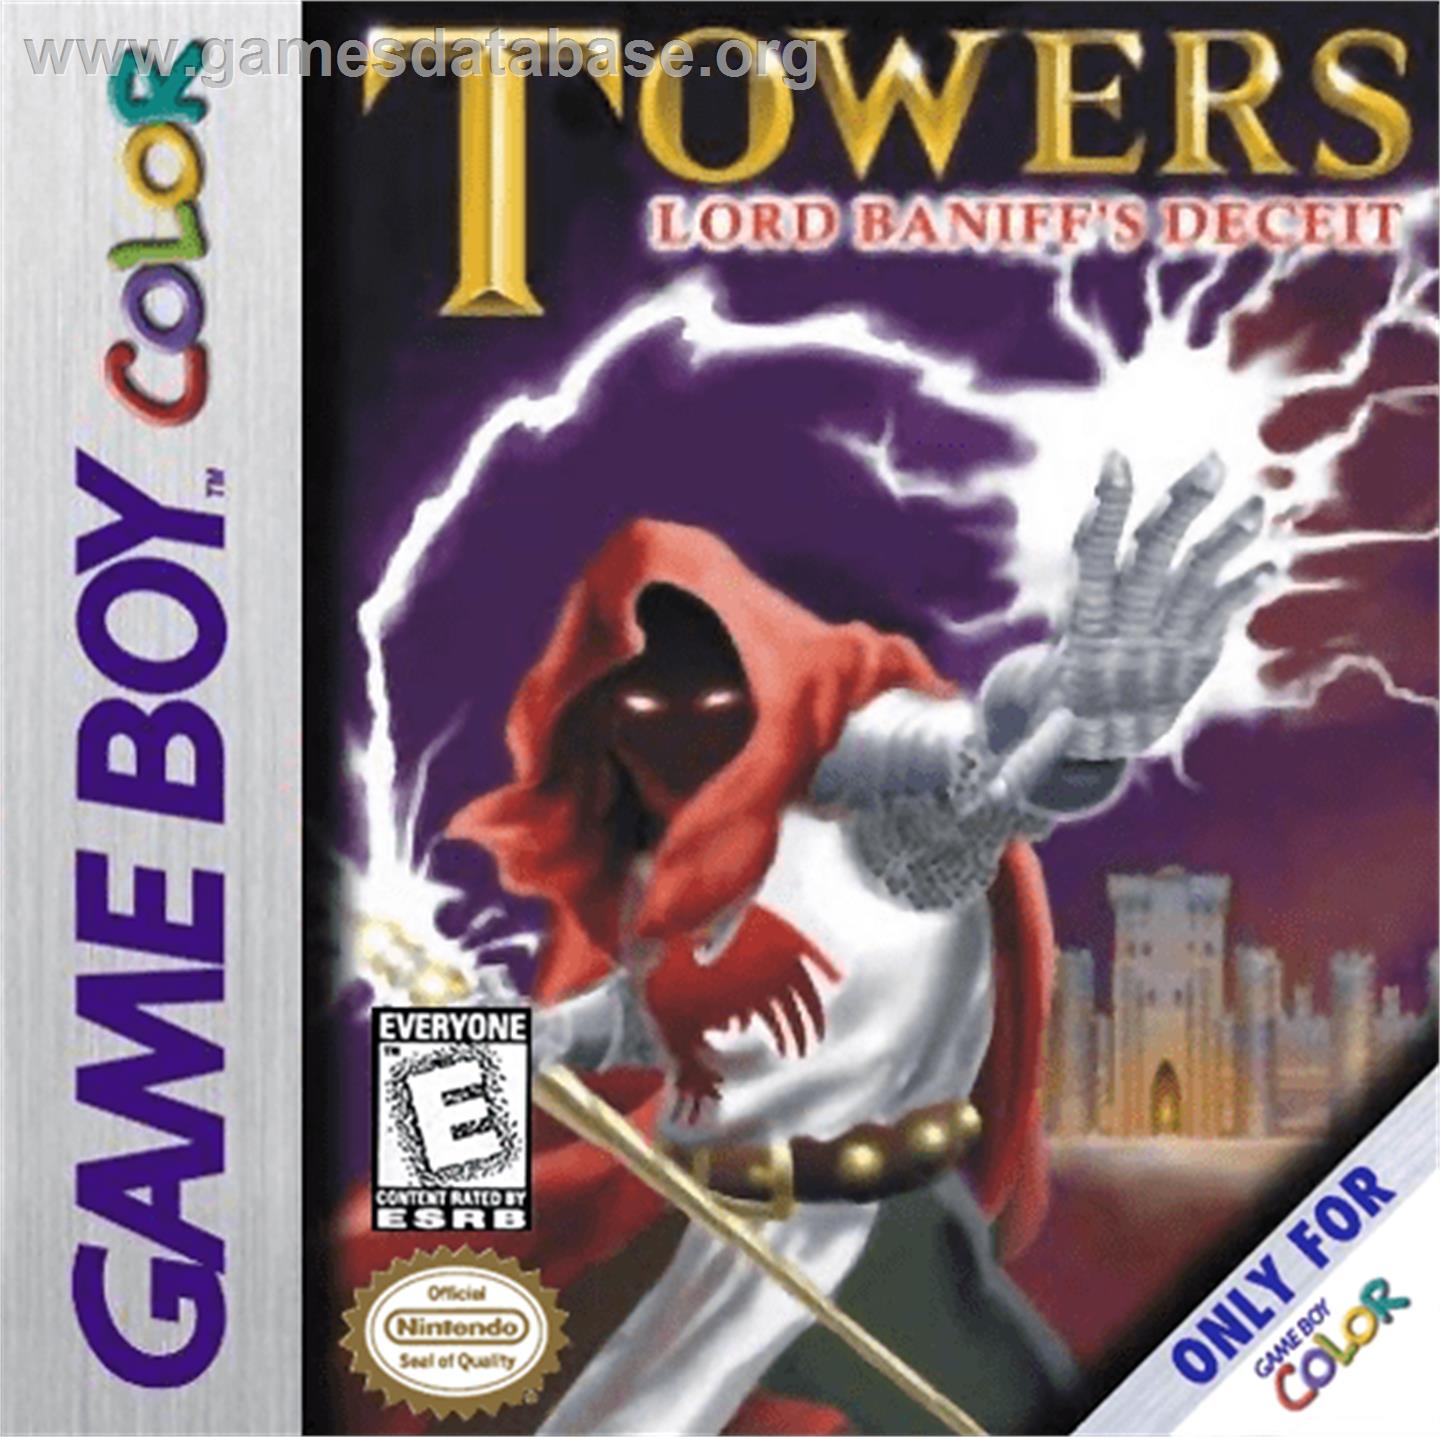 Towers: Lord Baniff's Deceit - Nintendo Game Boy Color - Artwork - Box